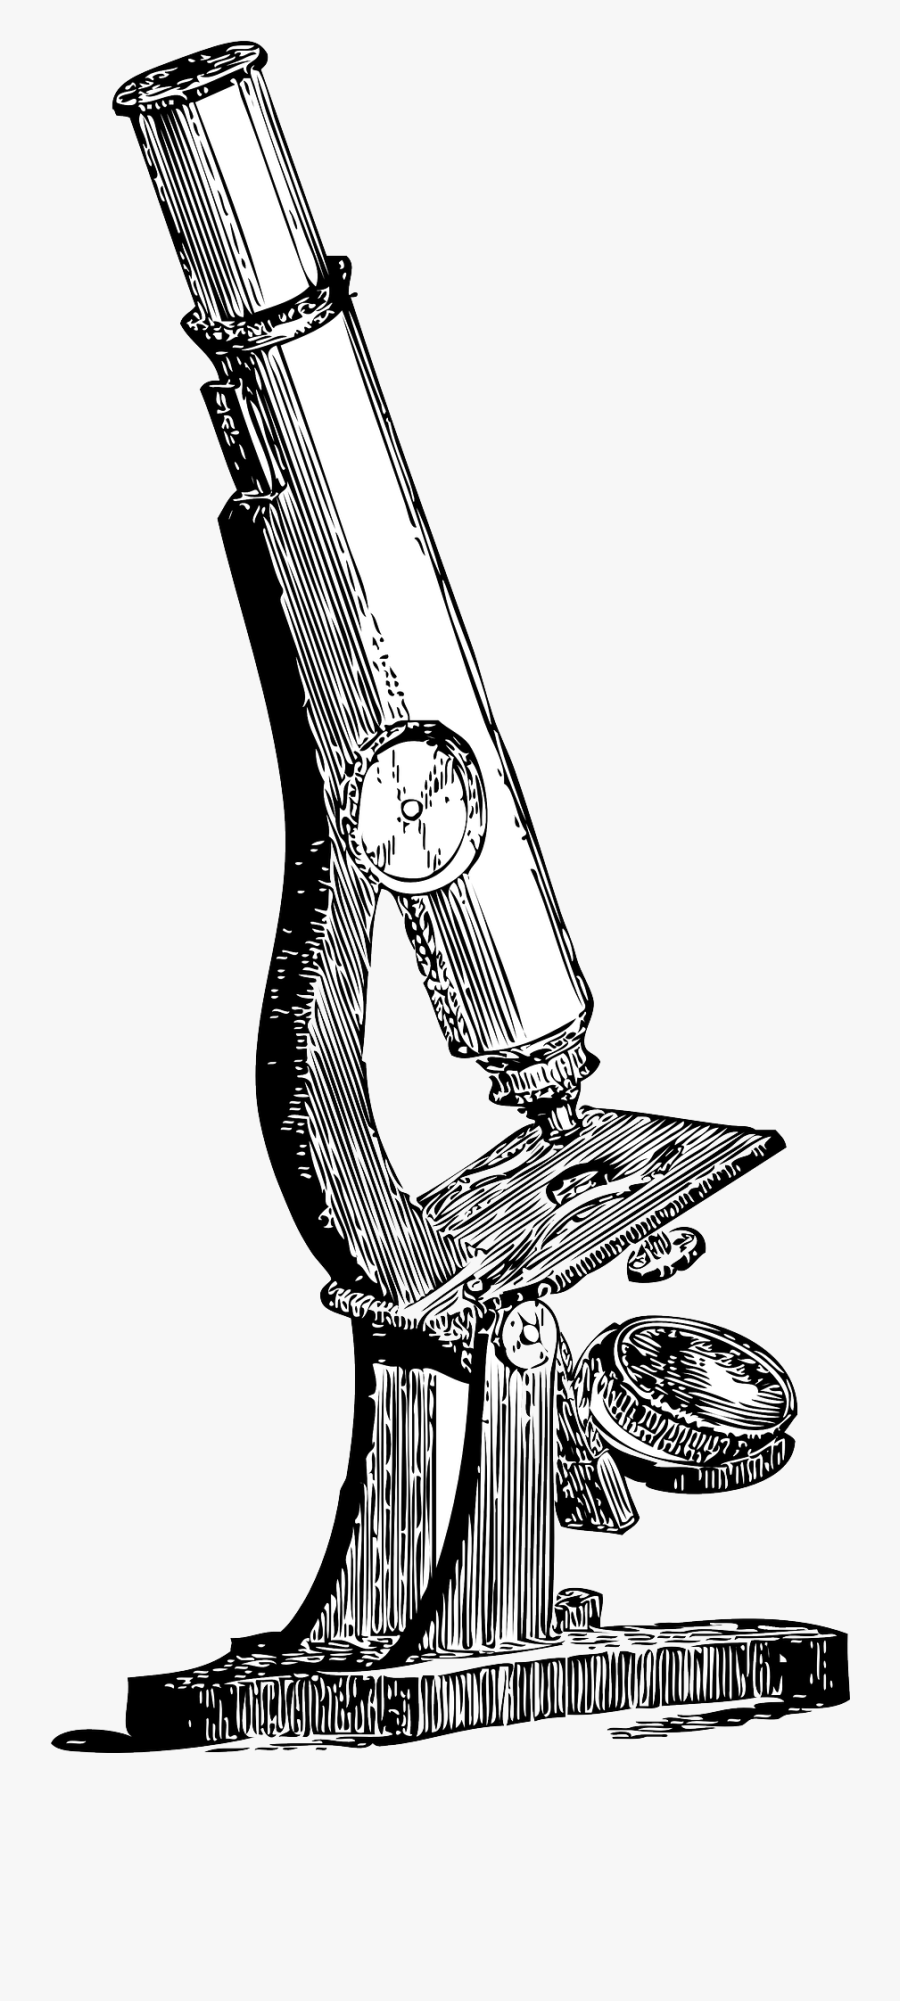 First Inventor Of Microscope, Transparent Clipart